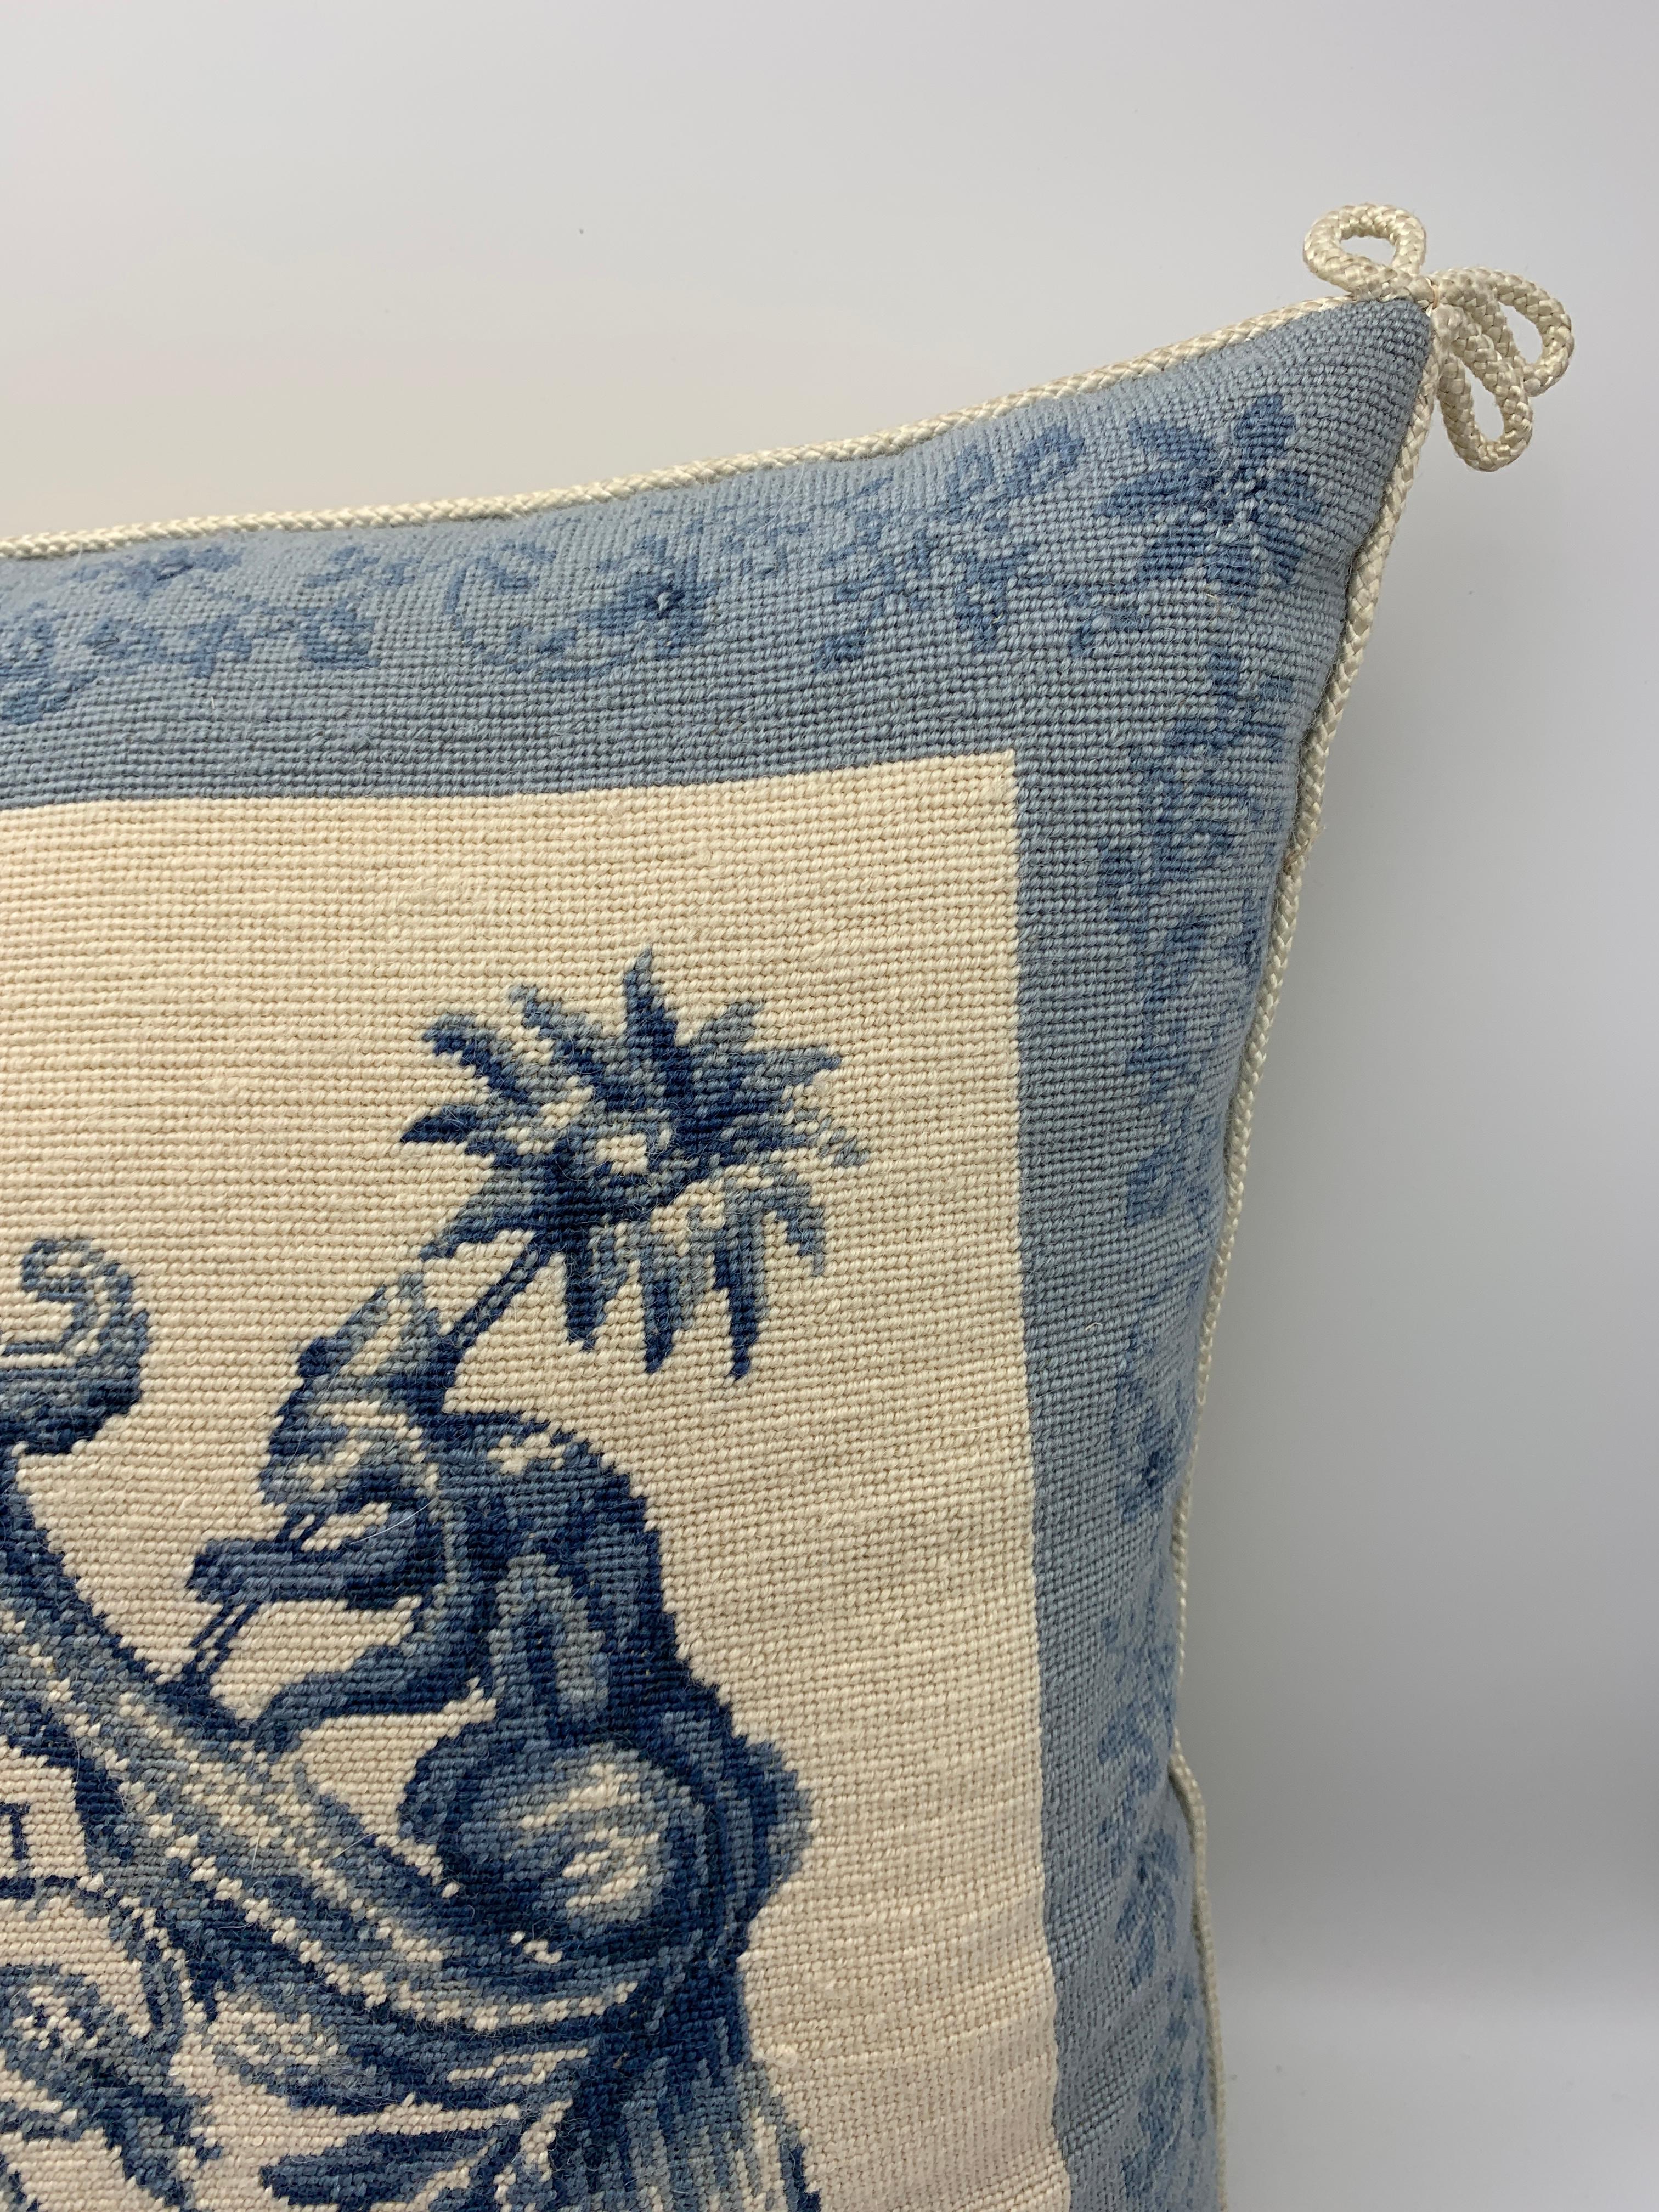 Wool 1970s Chinoiserie Blue and White Pagoda Needlepoint Pillow For Sale